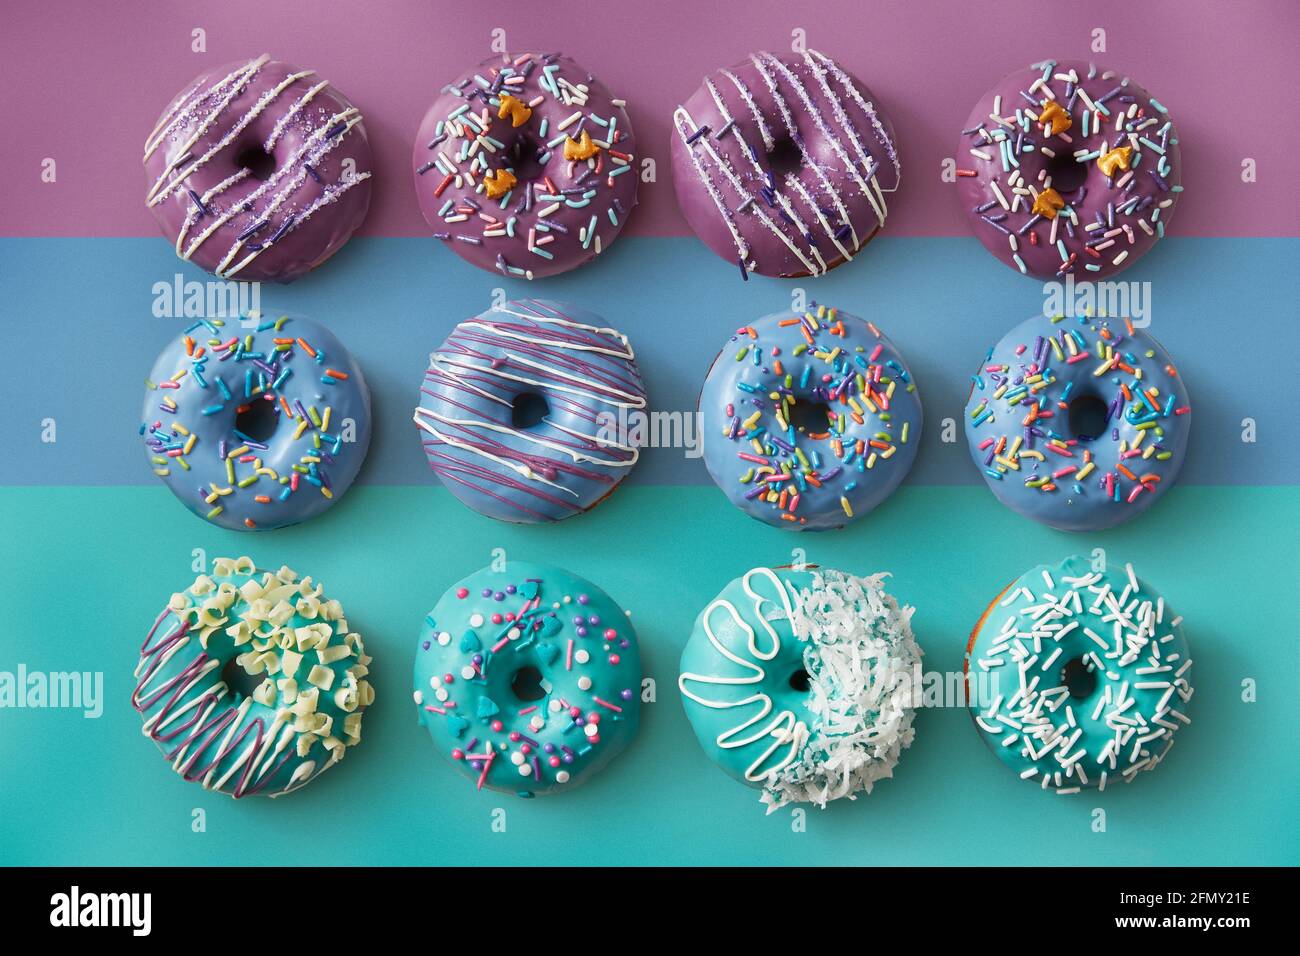 Colorful Donuts on striped pastel background Stock Photo